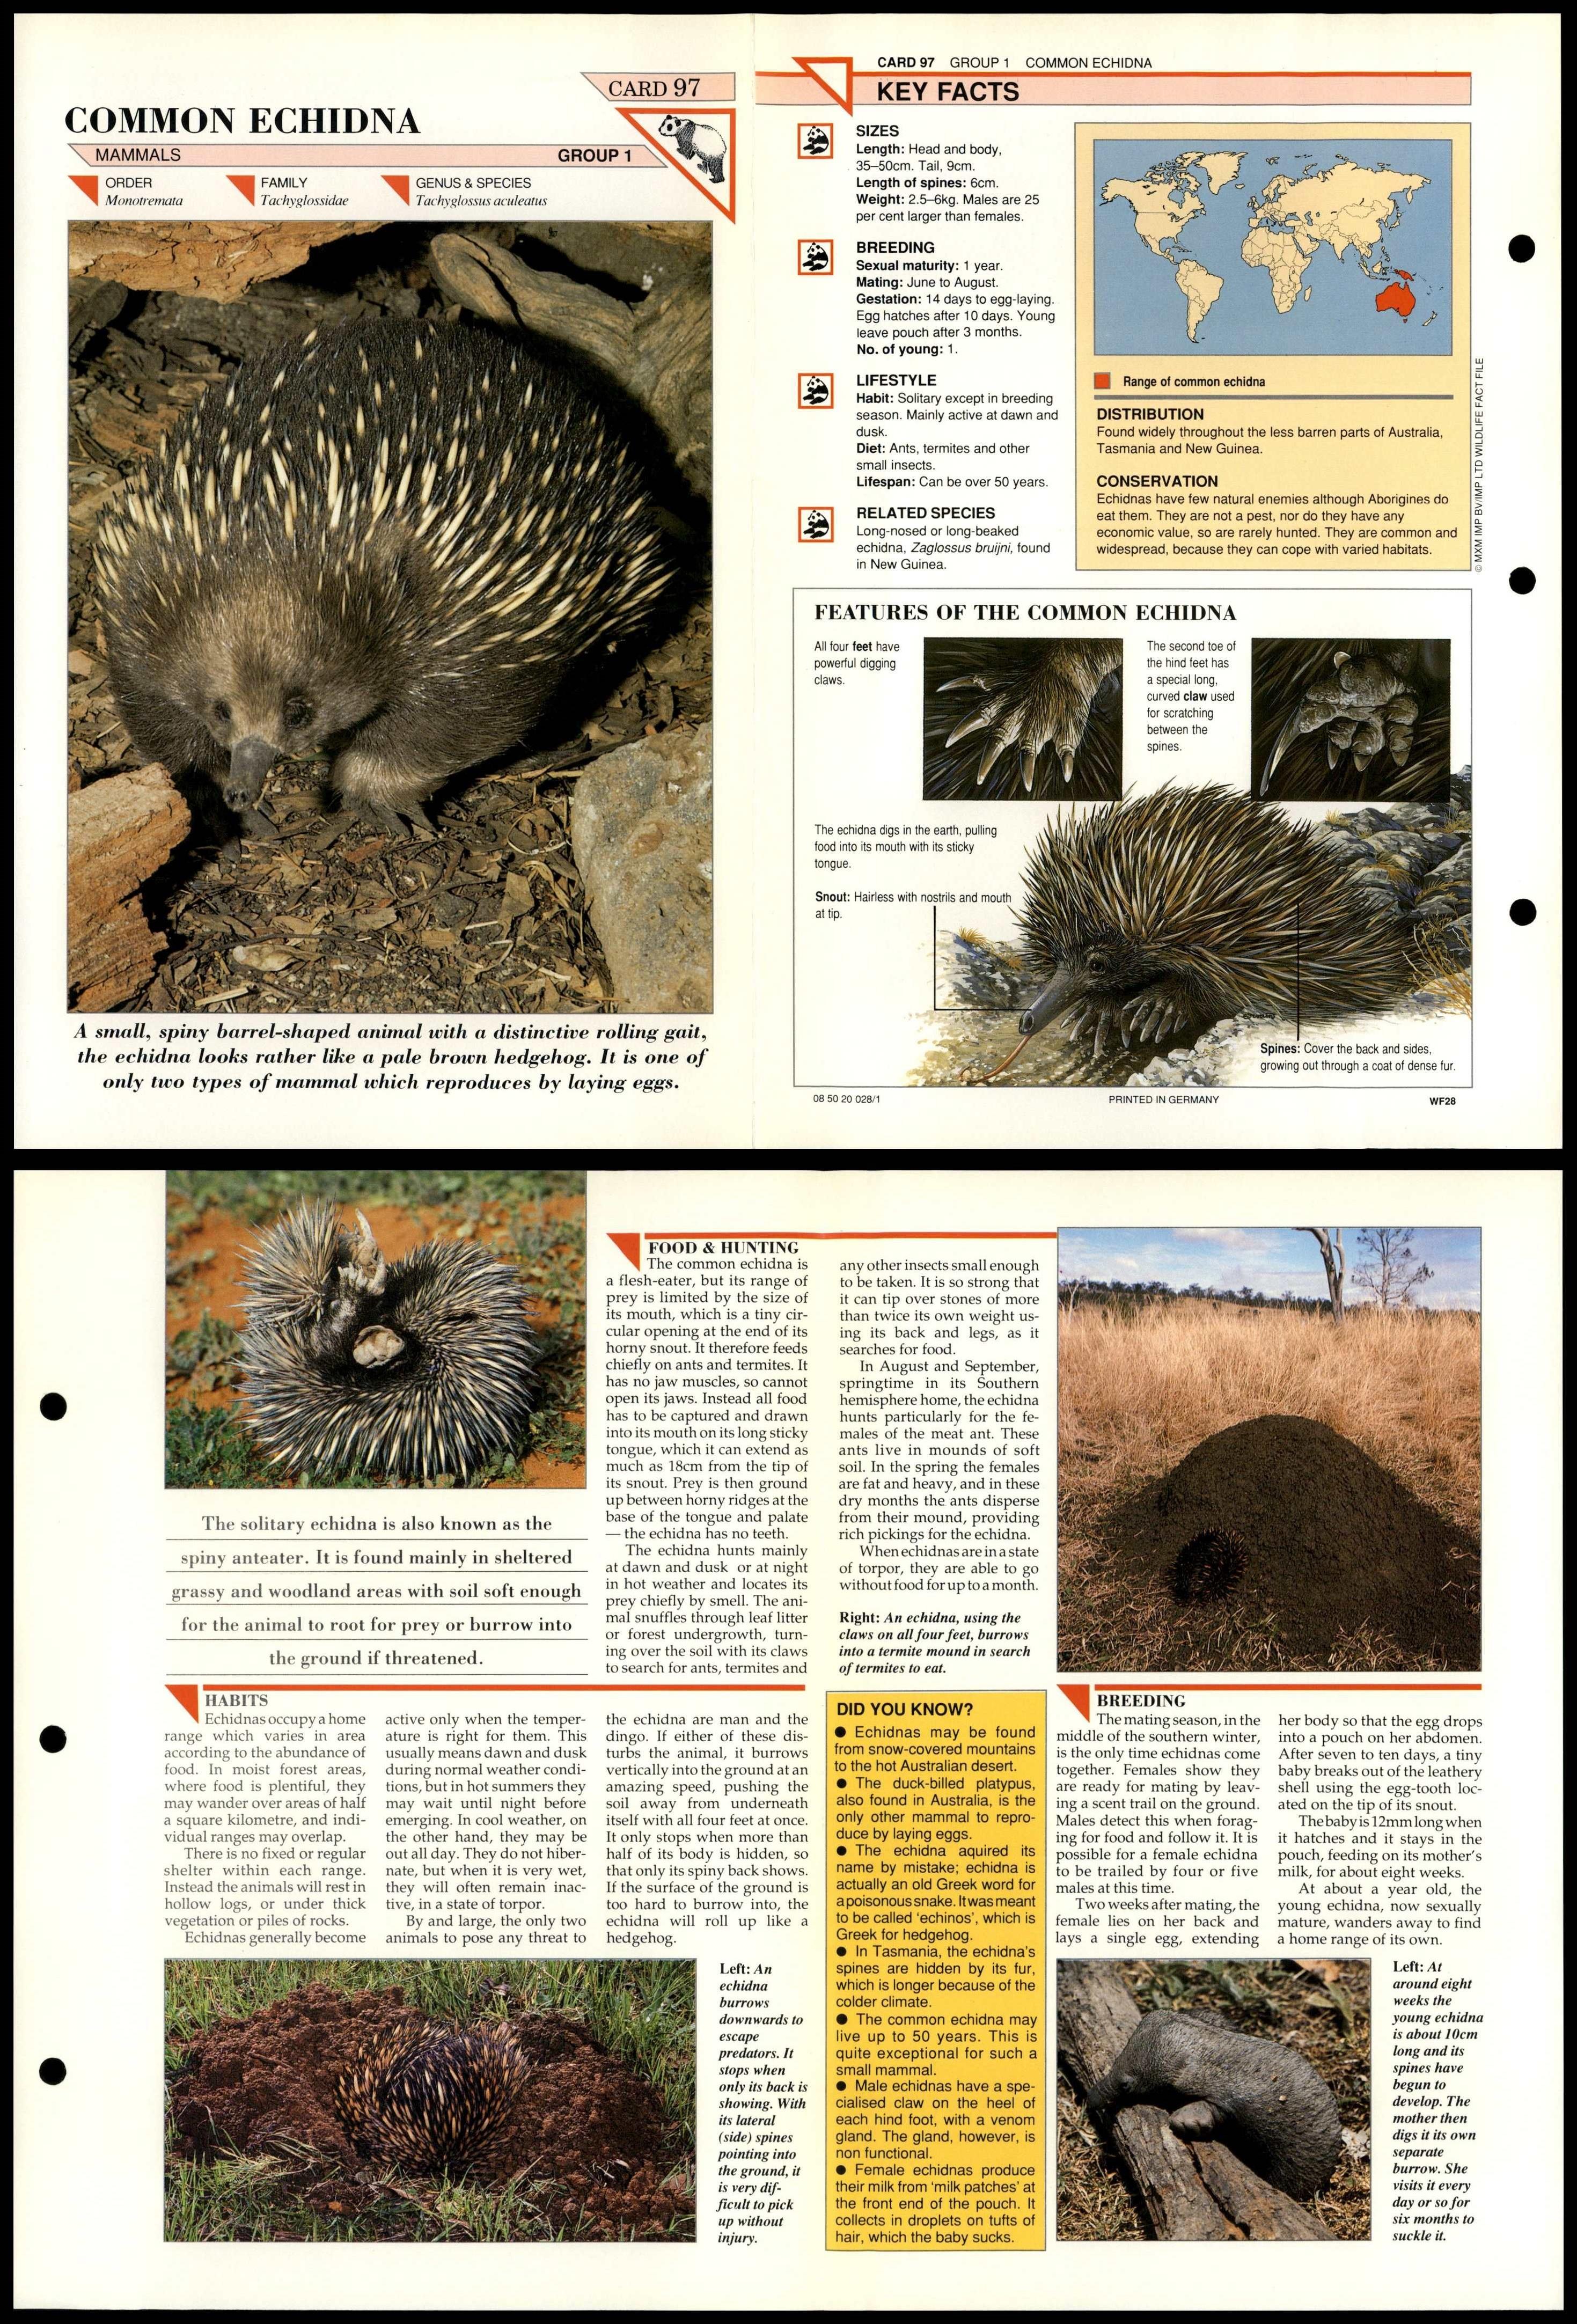 Common Echidna #97 Mammals Wildlife Fact File Fold-Out Card